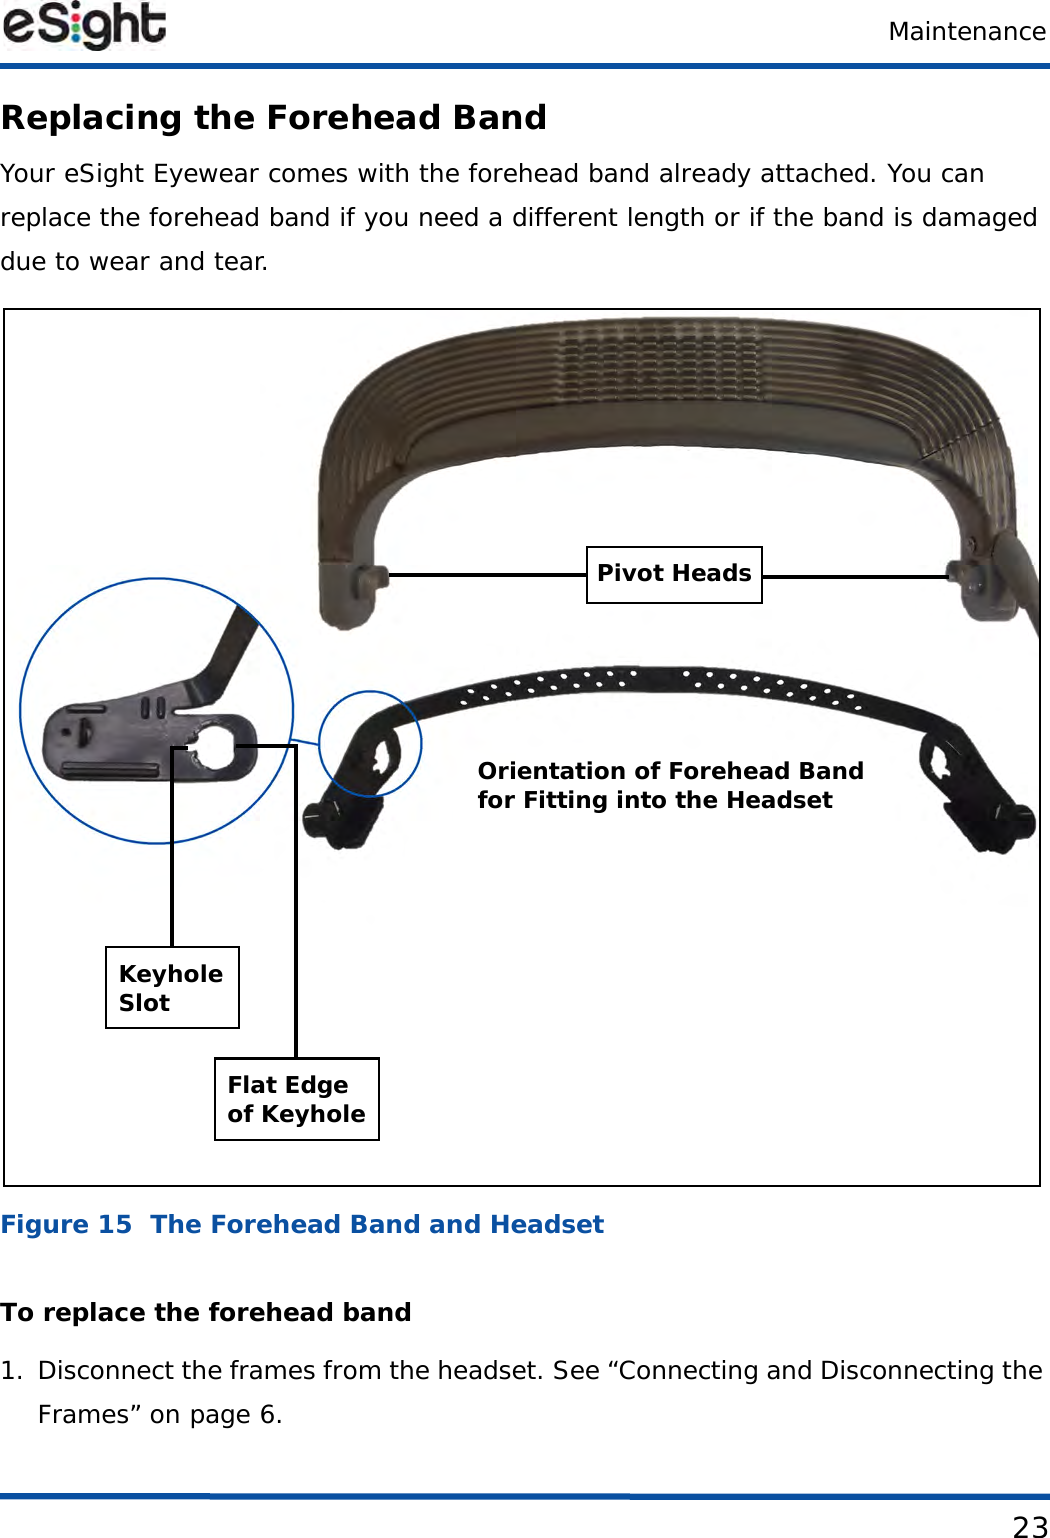 Maintenance23Replacing the Forehead BandYour eSight Eyewear comes with the forehead band already attached. You can replace the forehead band if you need a different length or if the band is damaged due to wear and tear.Figure 15  The Forehead Band and HeadsetTo replace the forehead band1. Disconnect the frames from the headset. See “Connecting and Disconnecting the Frames” on page 6.Flat Edgeof KeyholeOrientation of Forehead Band   for Fitting into the HeadsetKeyholeSlotPivot Heads